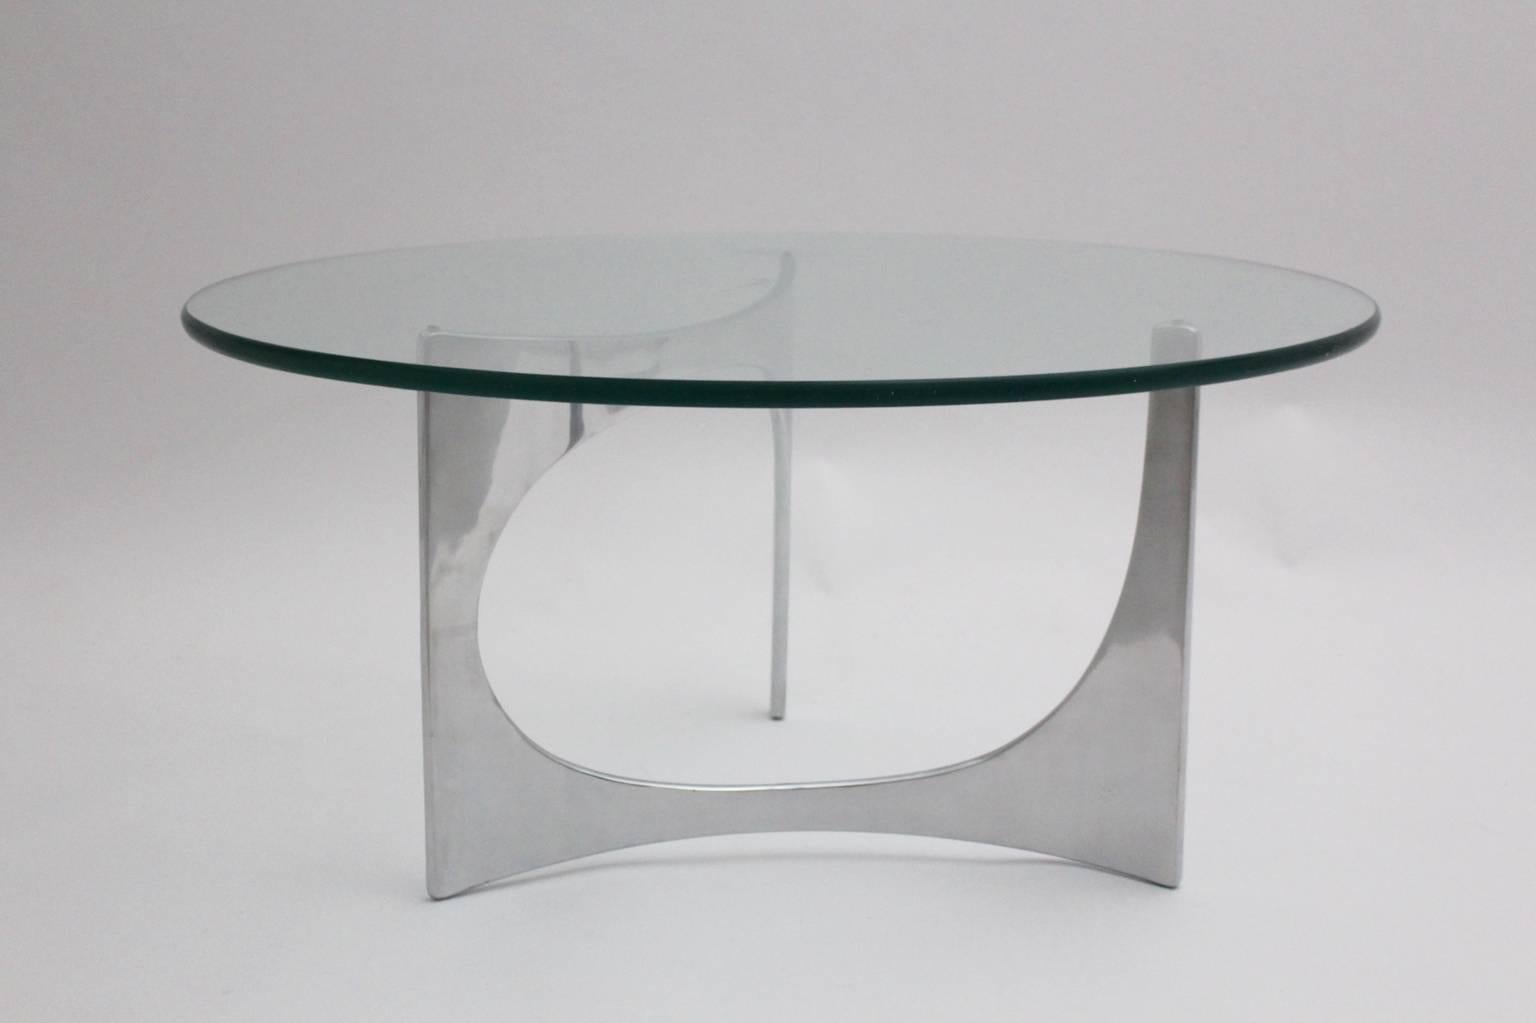 Space Age vintage metal coffee table, which was designed by Knut Hesterberg and produced by Bacher Tische Germany circa 1970.
The coffee table consists of a polished cast aluminium base with a clear glass top, which shows some nice scratches.
Very